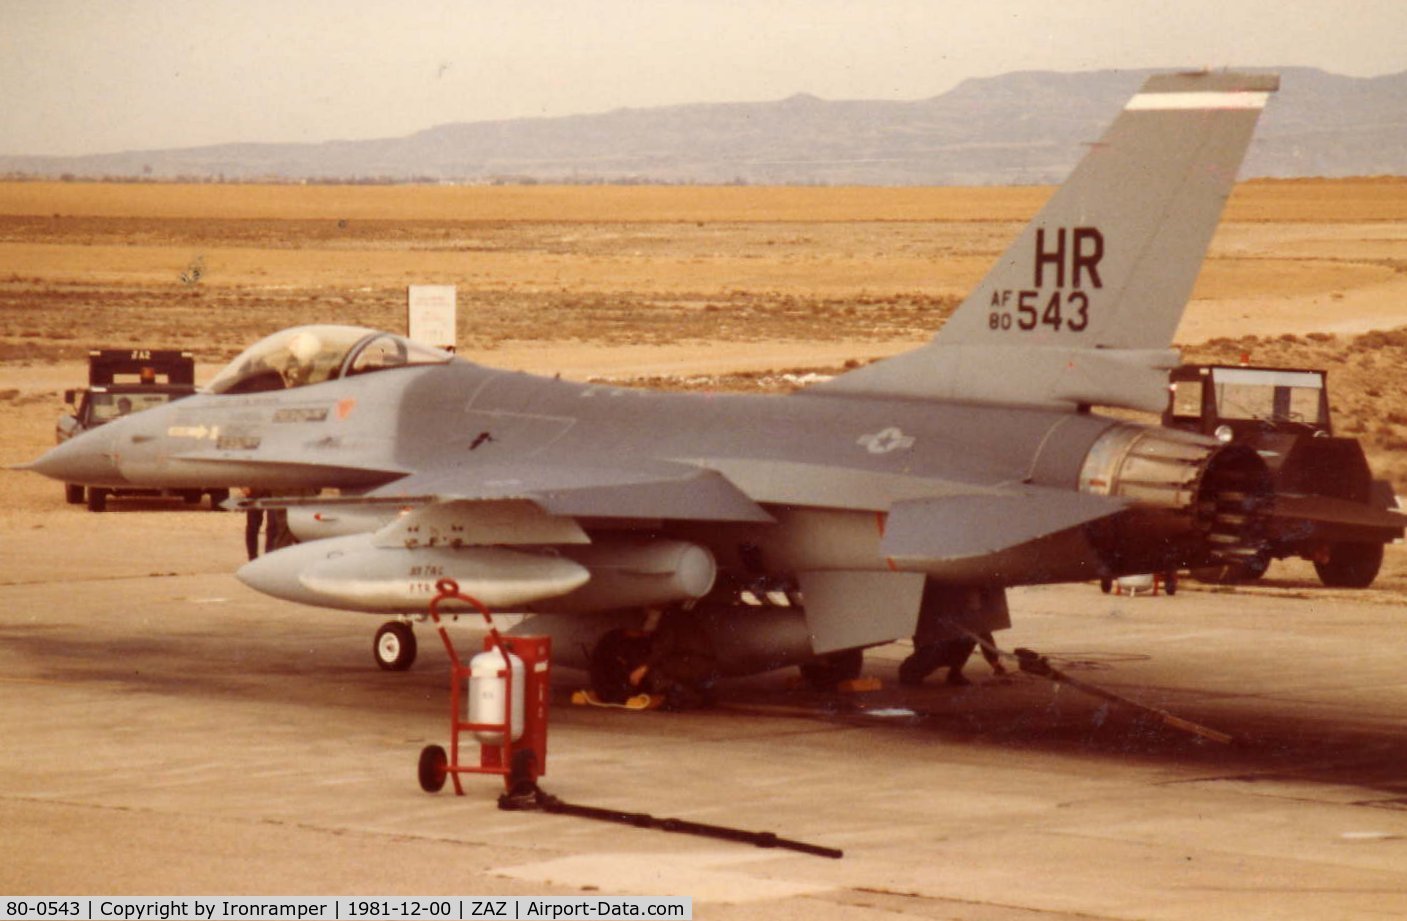 80-0543, 1980 General Dynamics F-16A Fighting Falcon C/N 61-264, 543 was one of the first F-16's assigned to USAF in Europe. Here she is tied down on the trim pad for an engine run. This a/c was assigned to the 50th Tac Ftr Wg/313th Tac Ftr Sqdn, Hahn AB, Germany. Crew Chief SSgt Dennis Wall